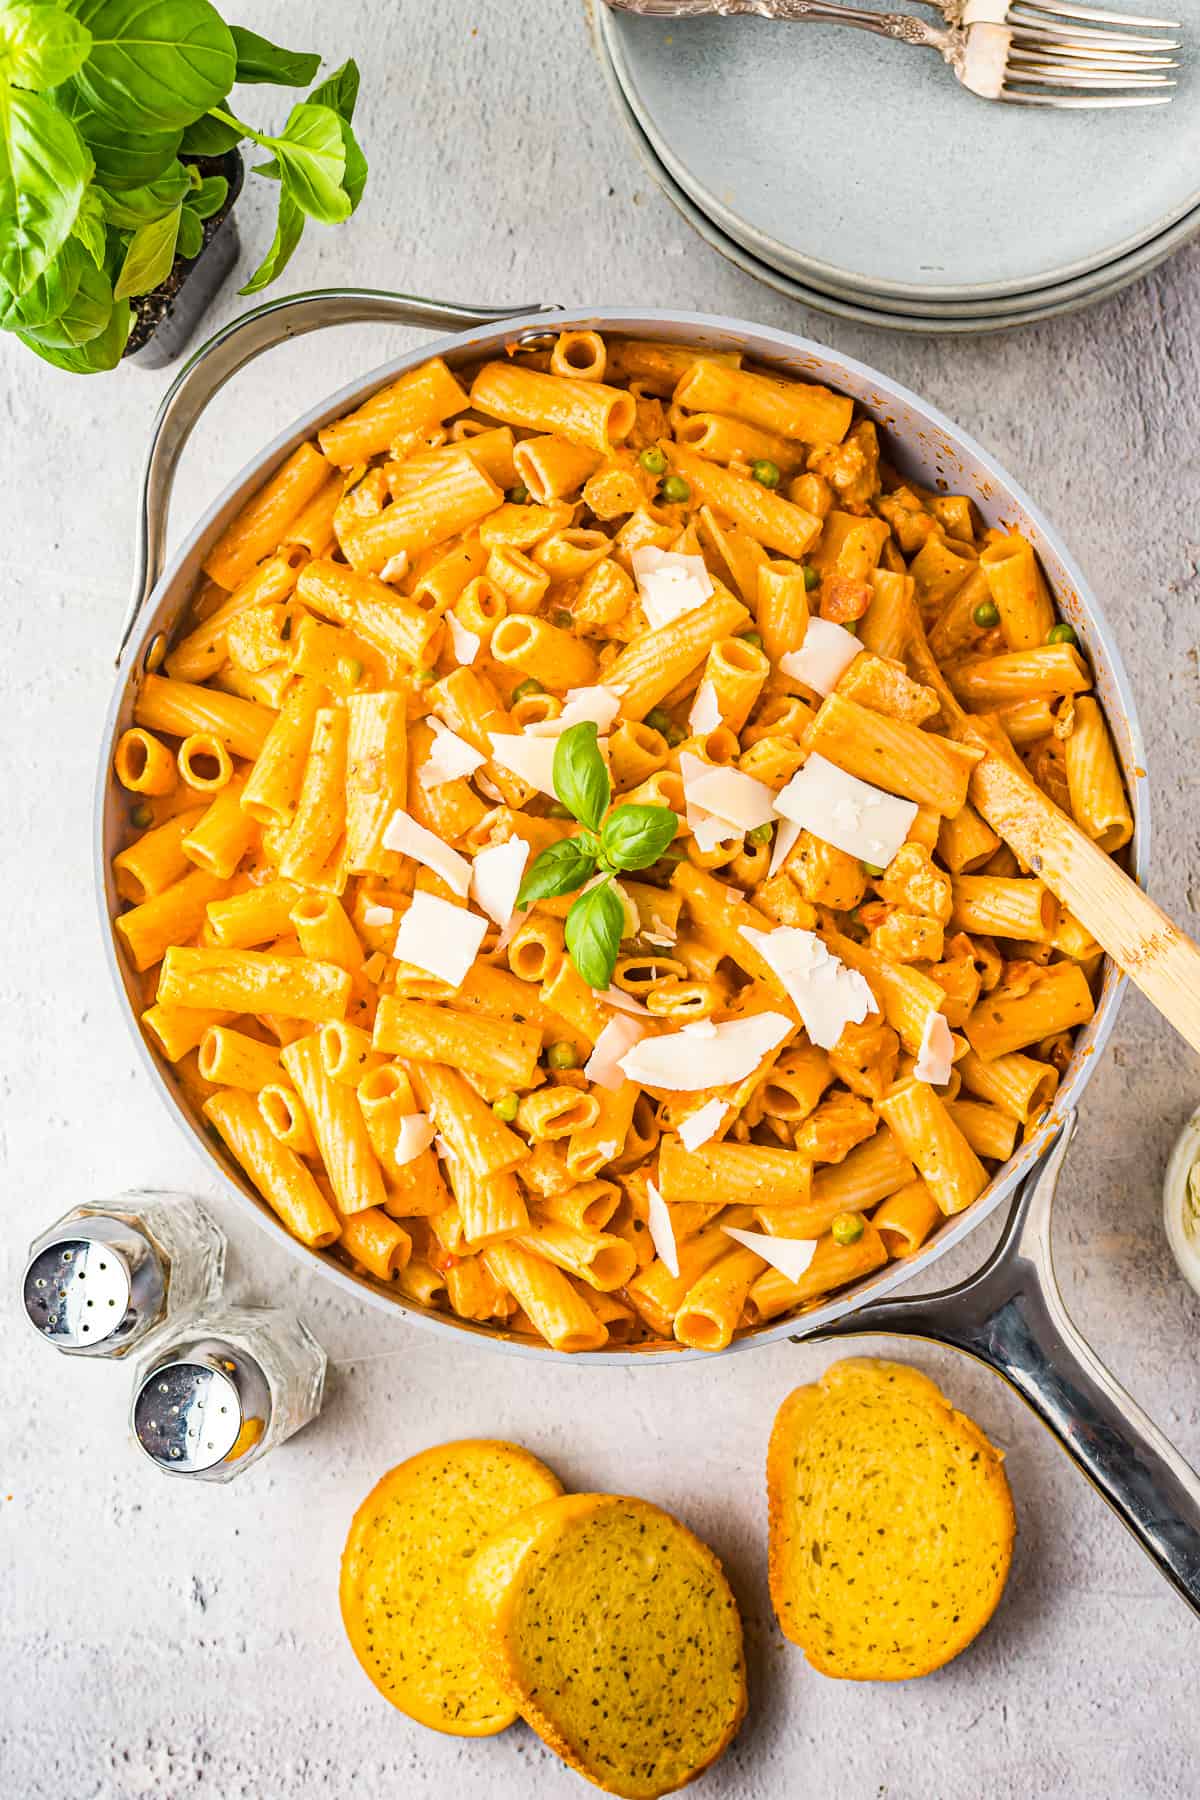 chicken rigatoni in a skillet with basil and a wooden spoon.